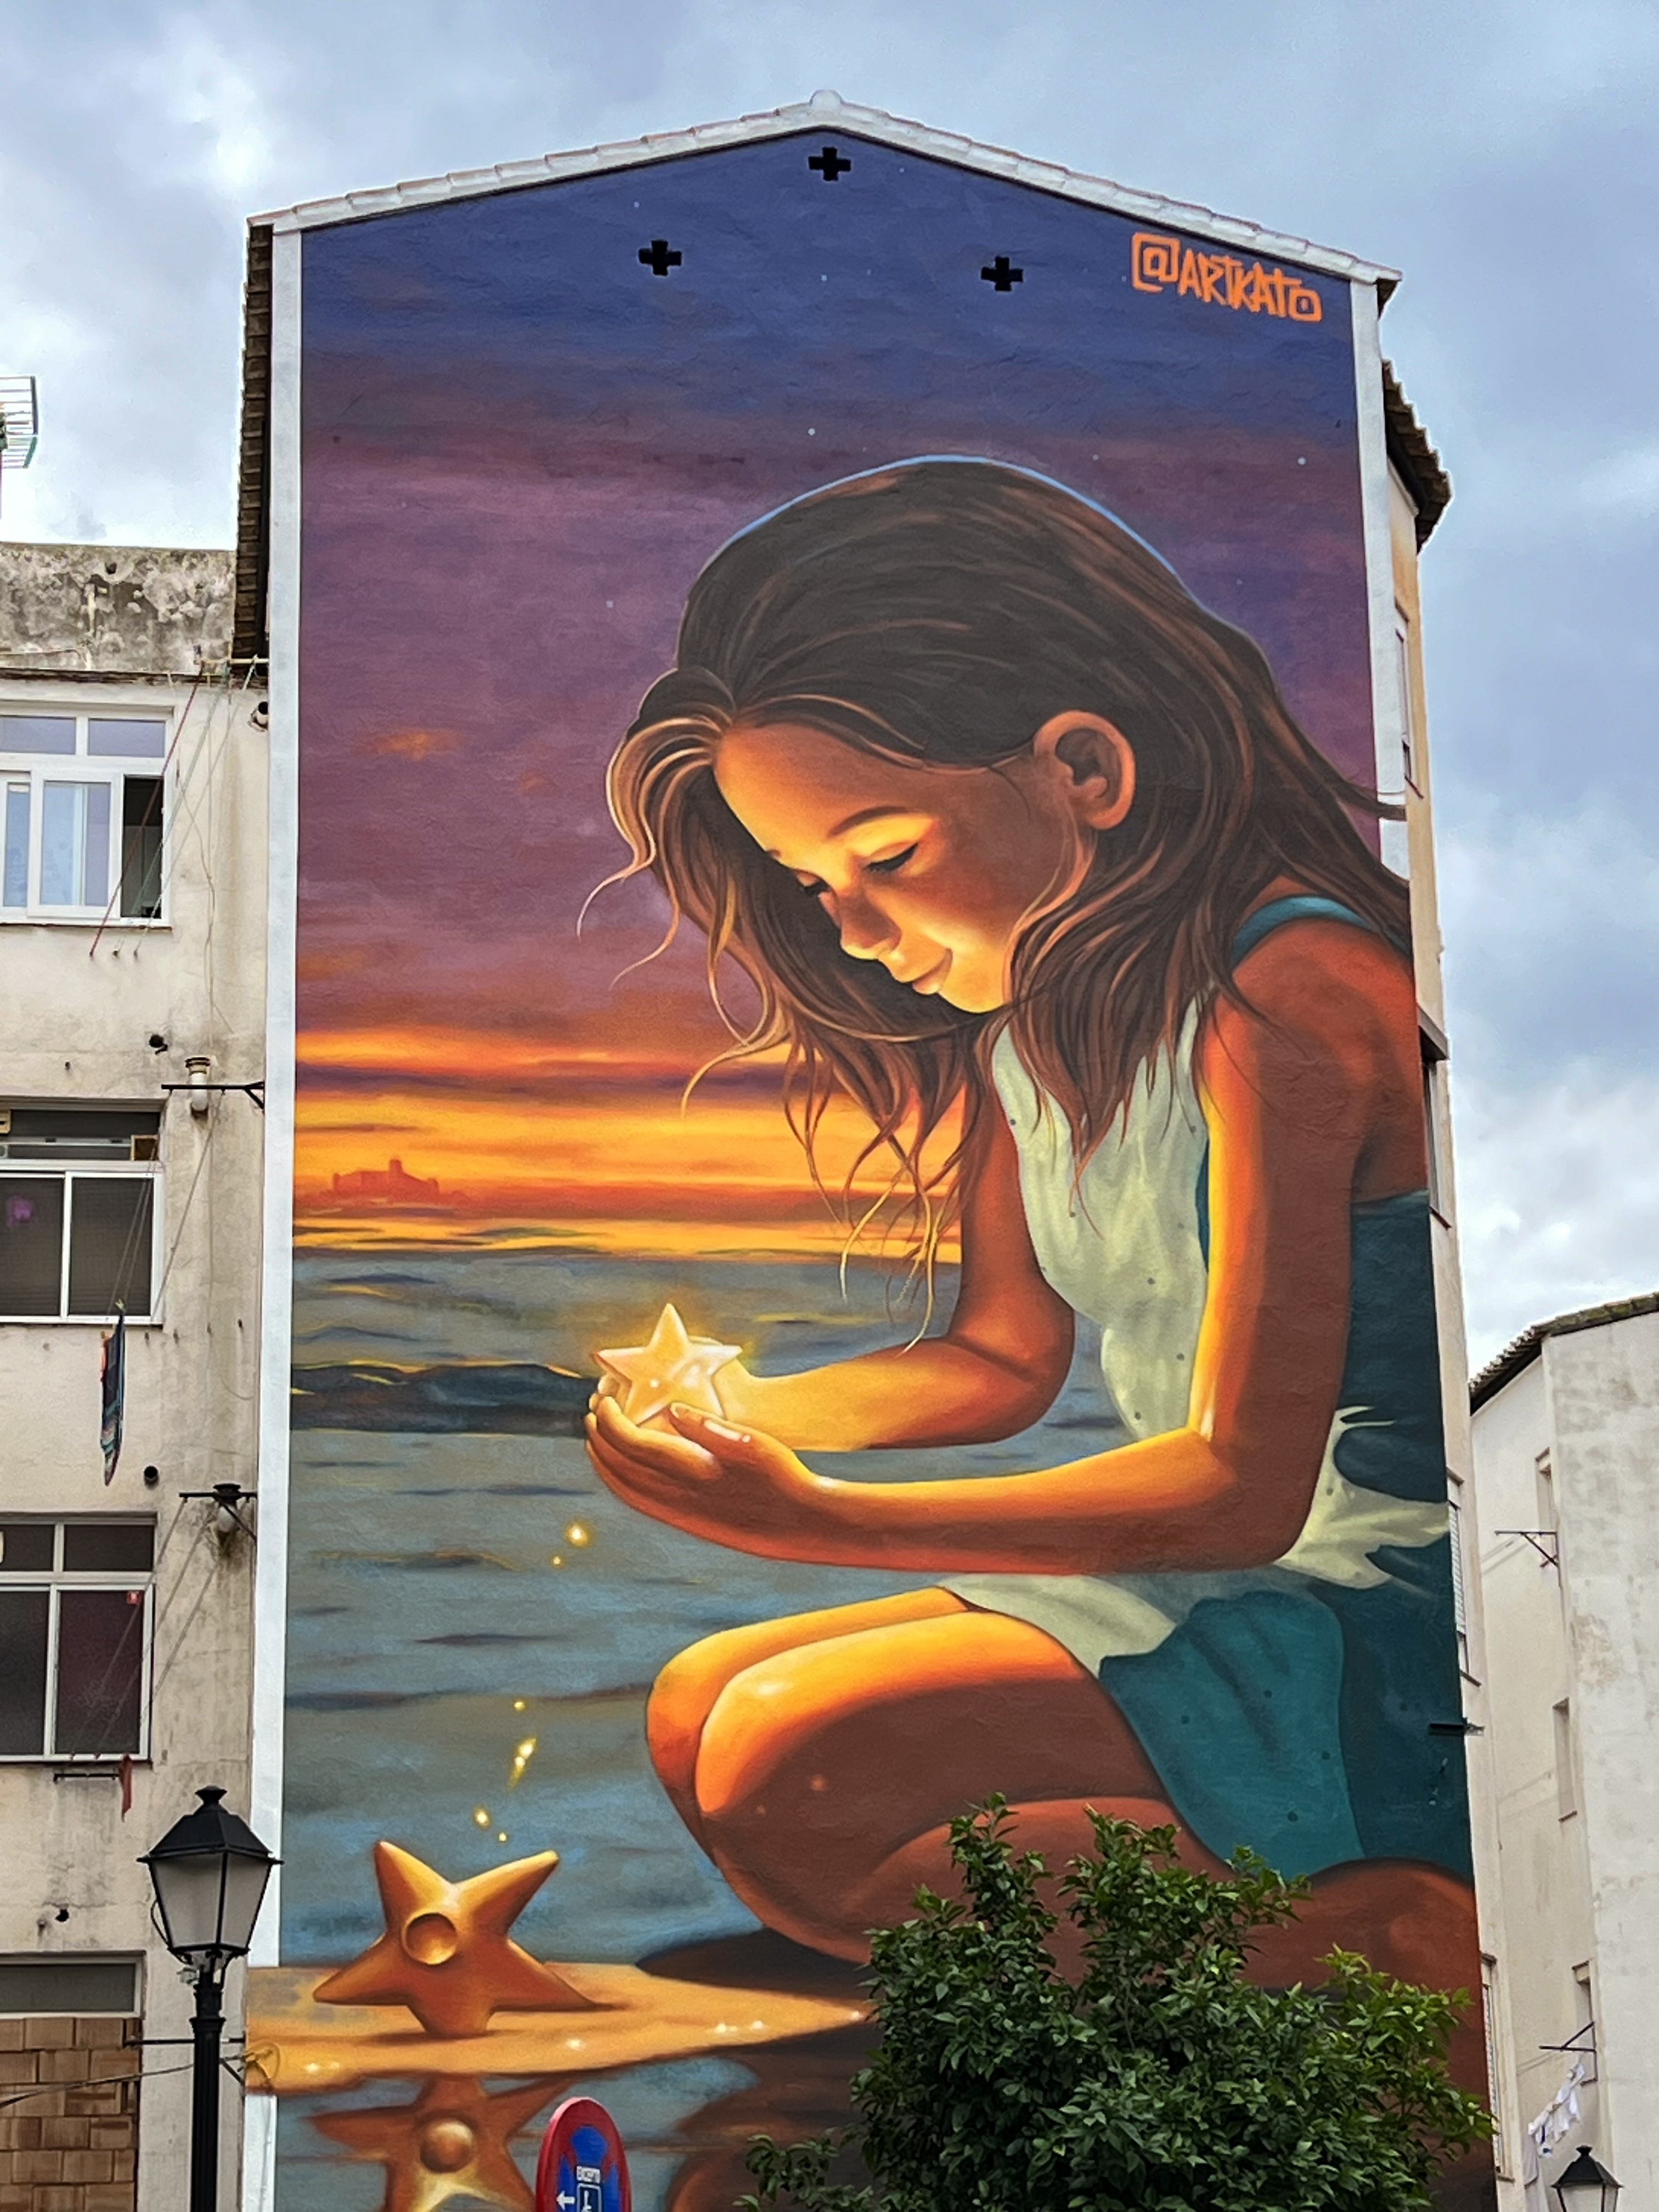 The Magic of Dreams by Kato - Street Art Cities